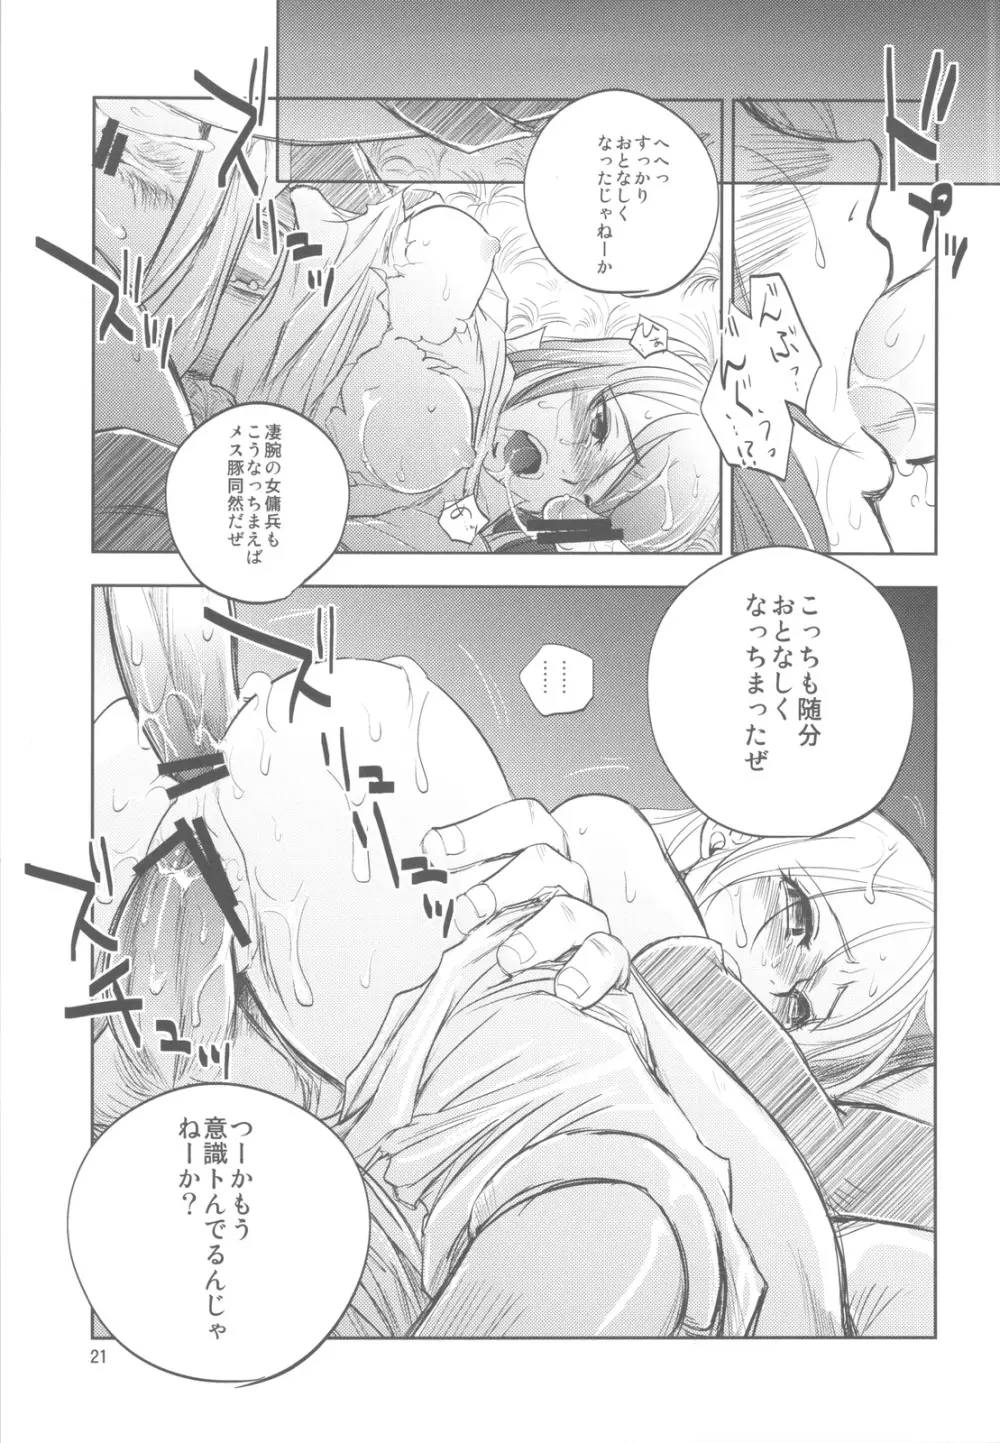 GRASSEN'S WAR ANOTHER STORY Ex #01 ノード侵攻 I Page.20